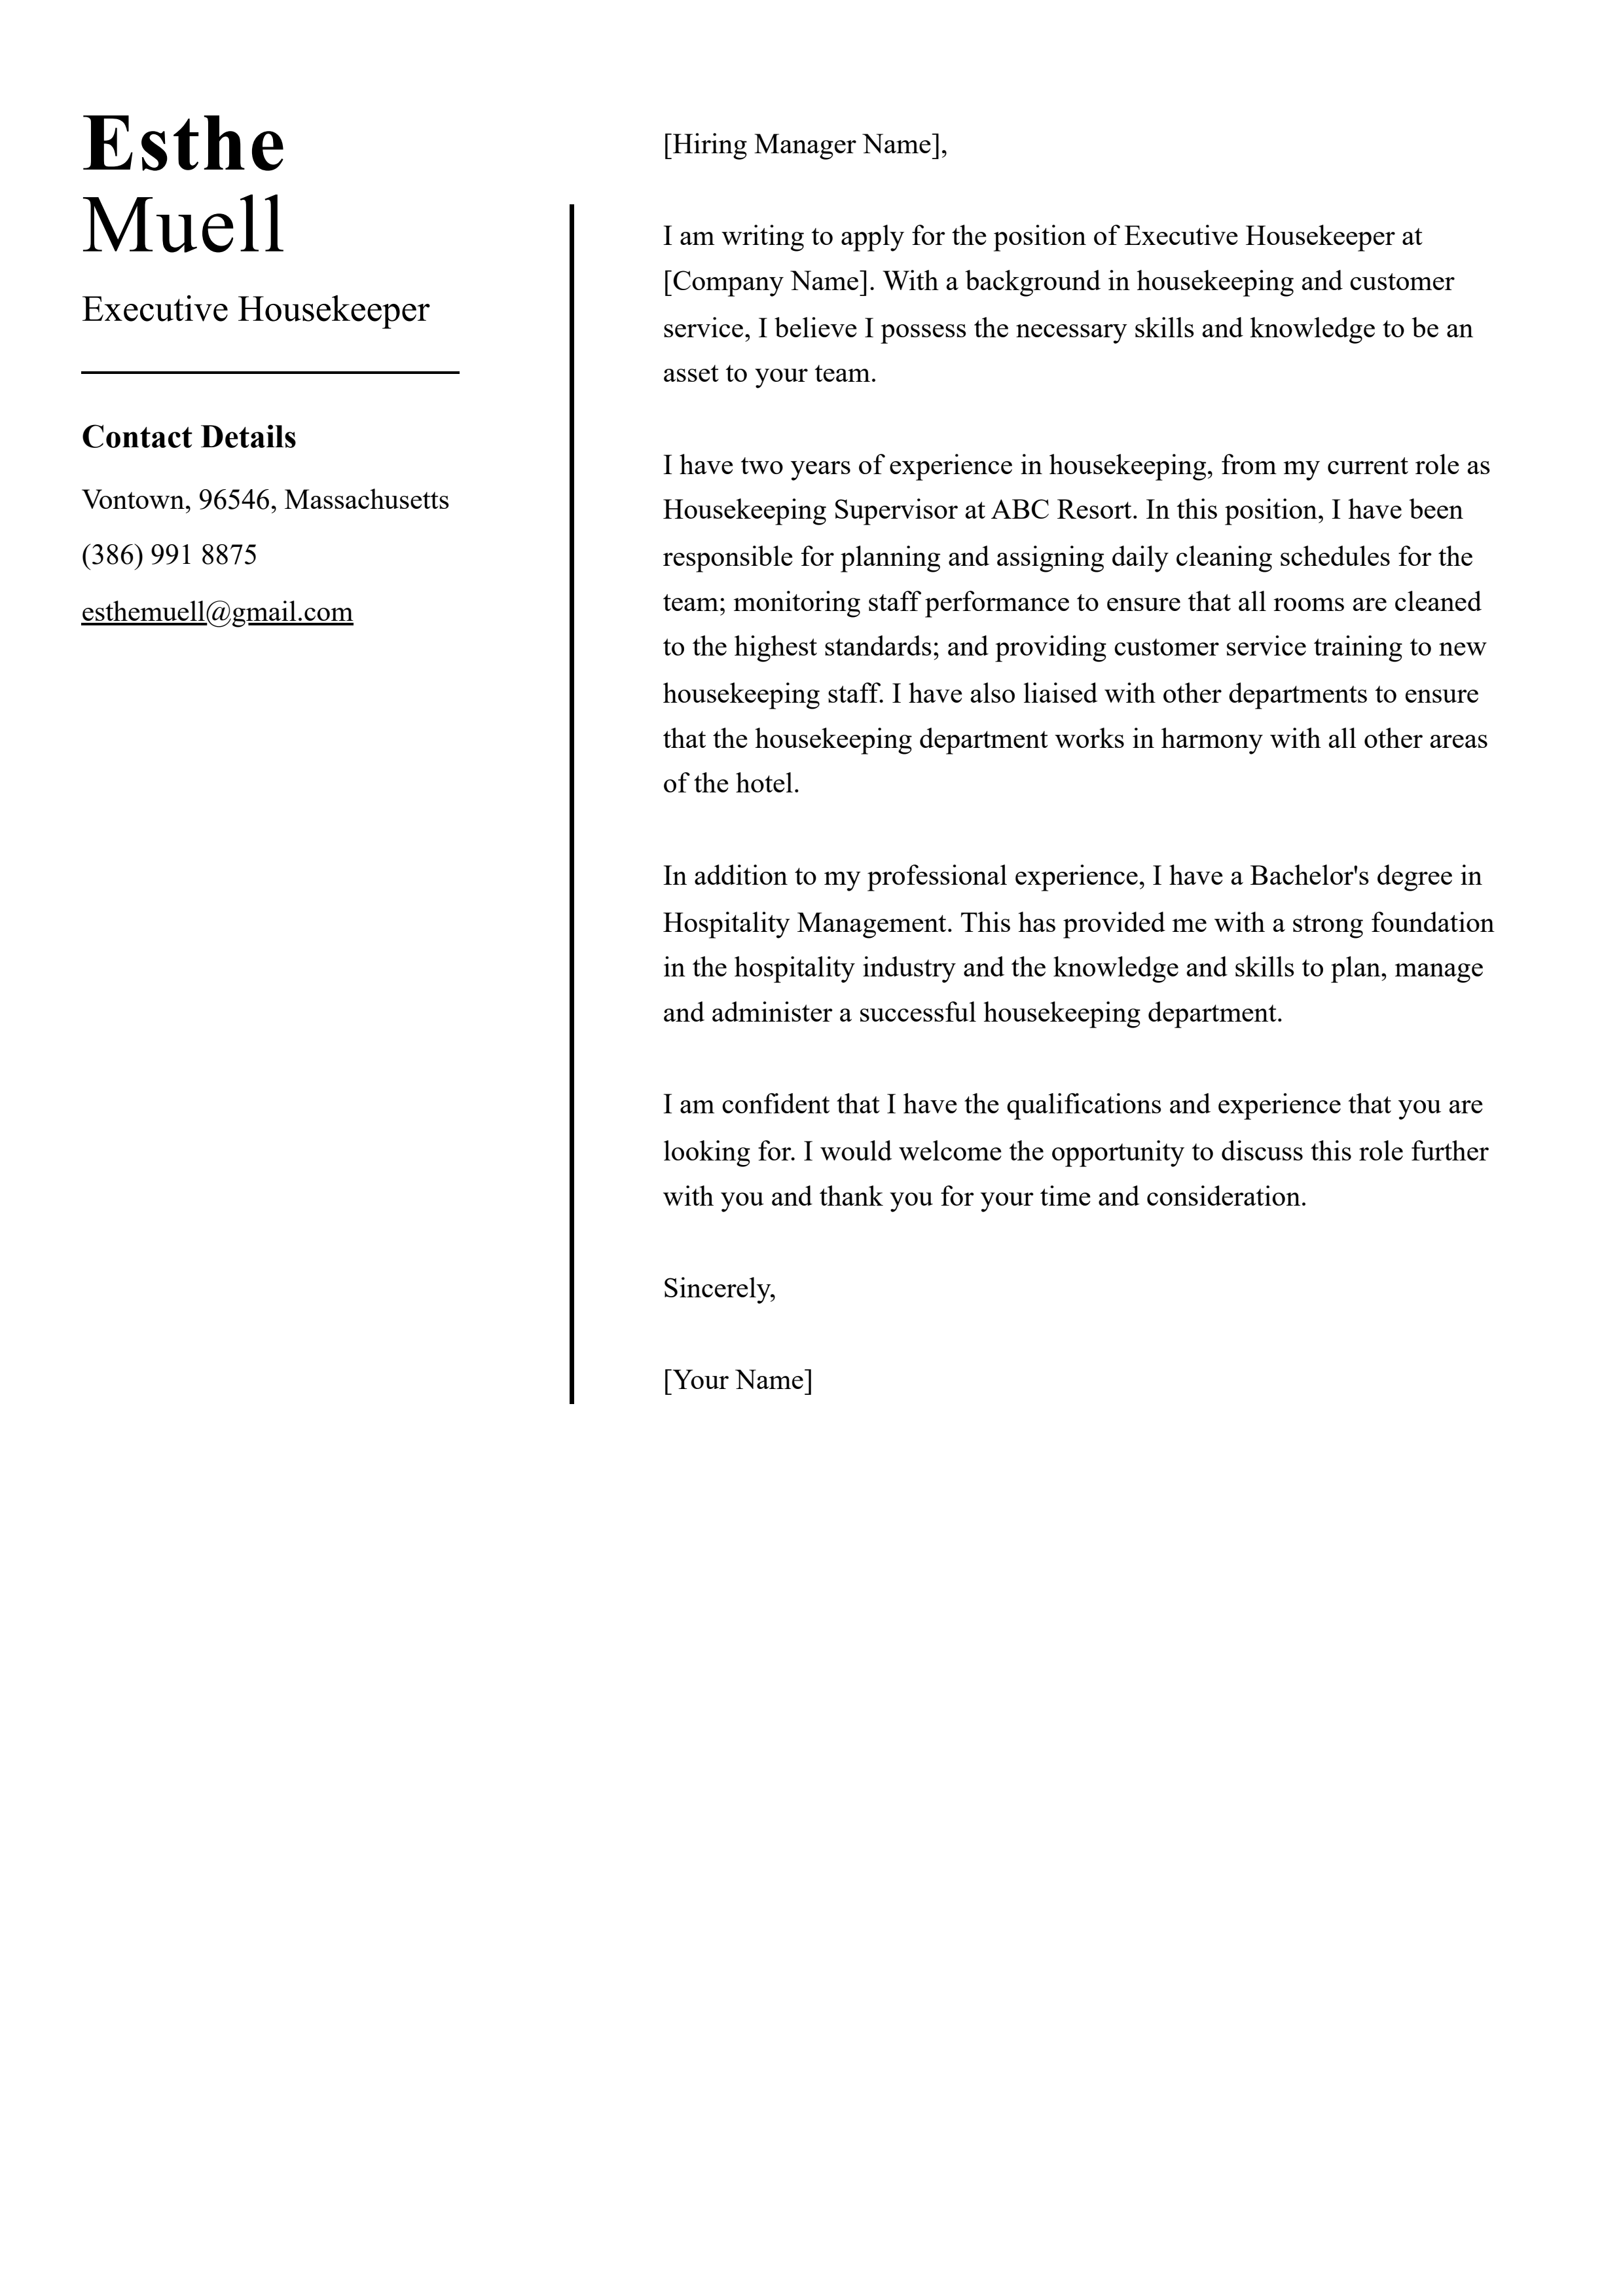 Executive Housekeeper Cover Letter Example